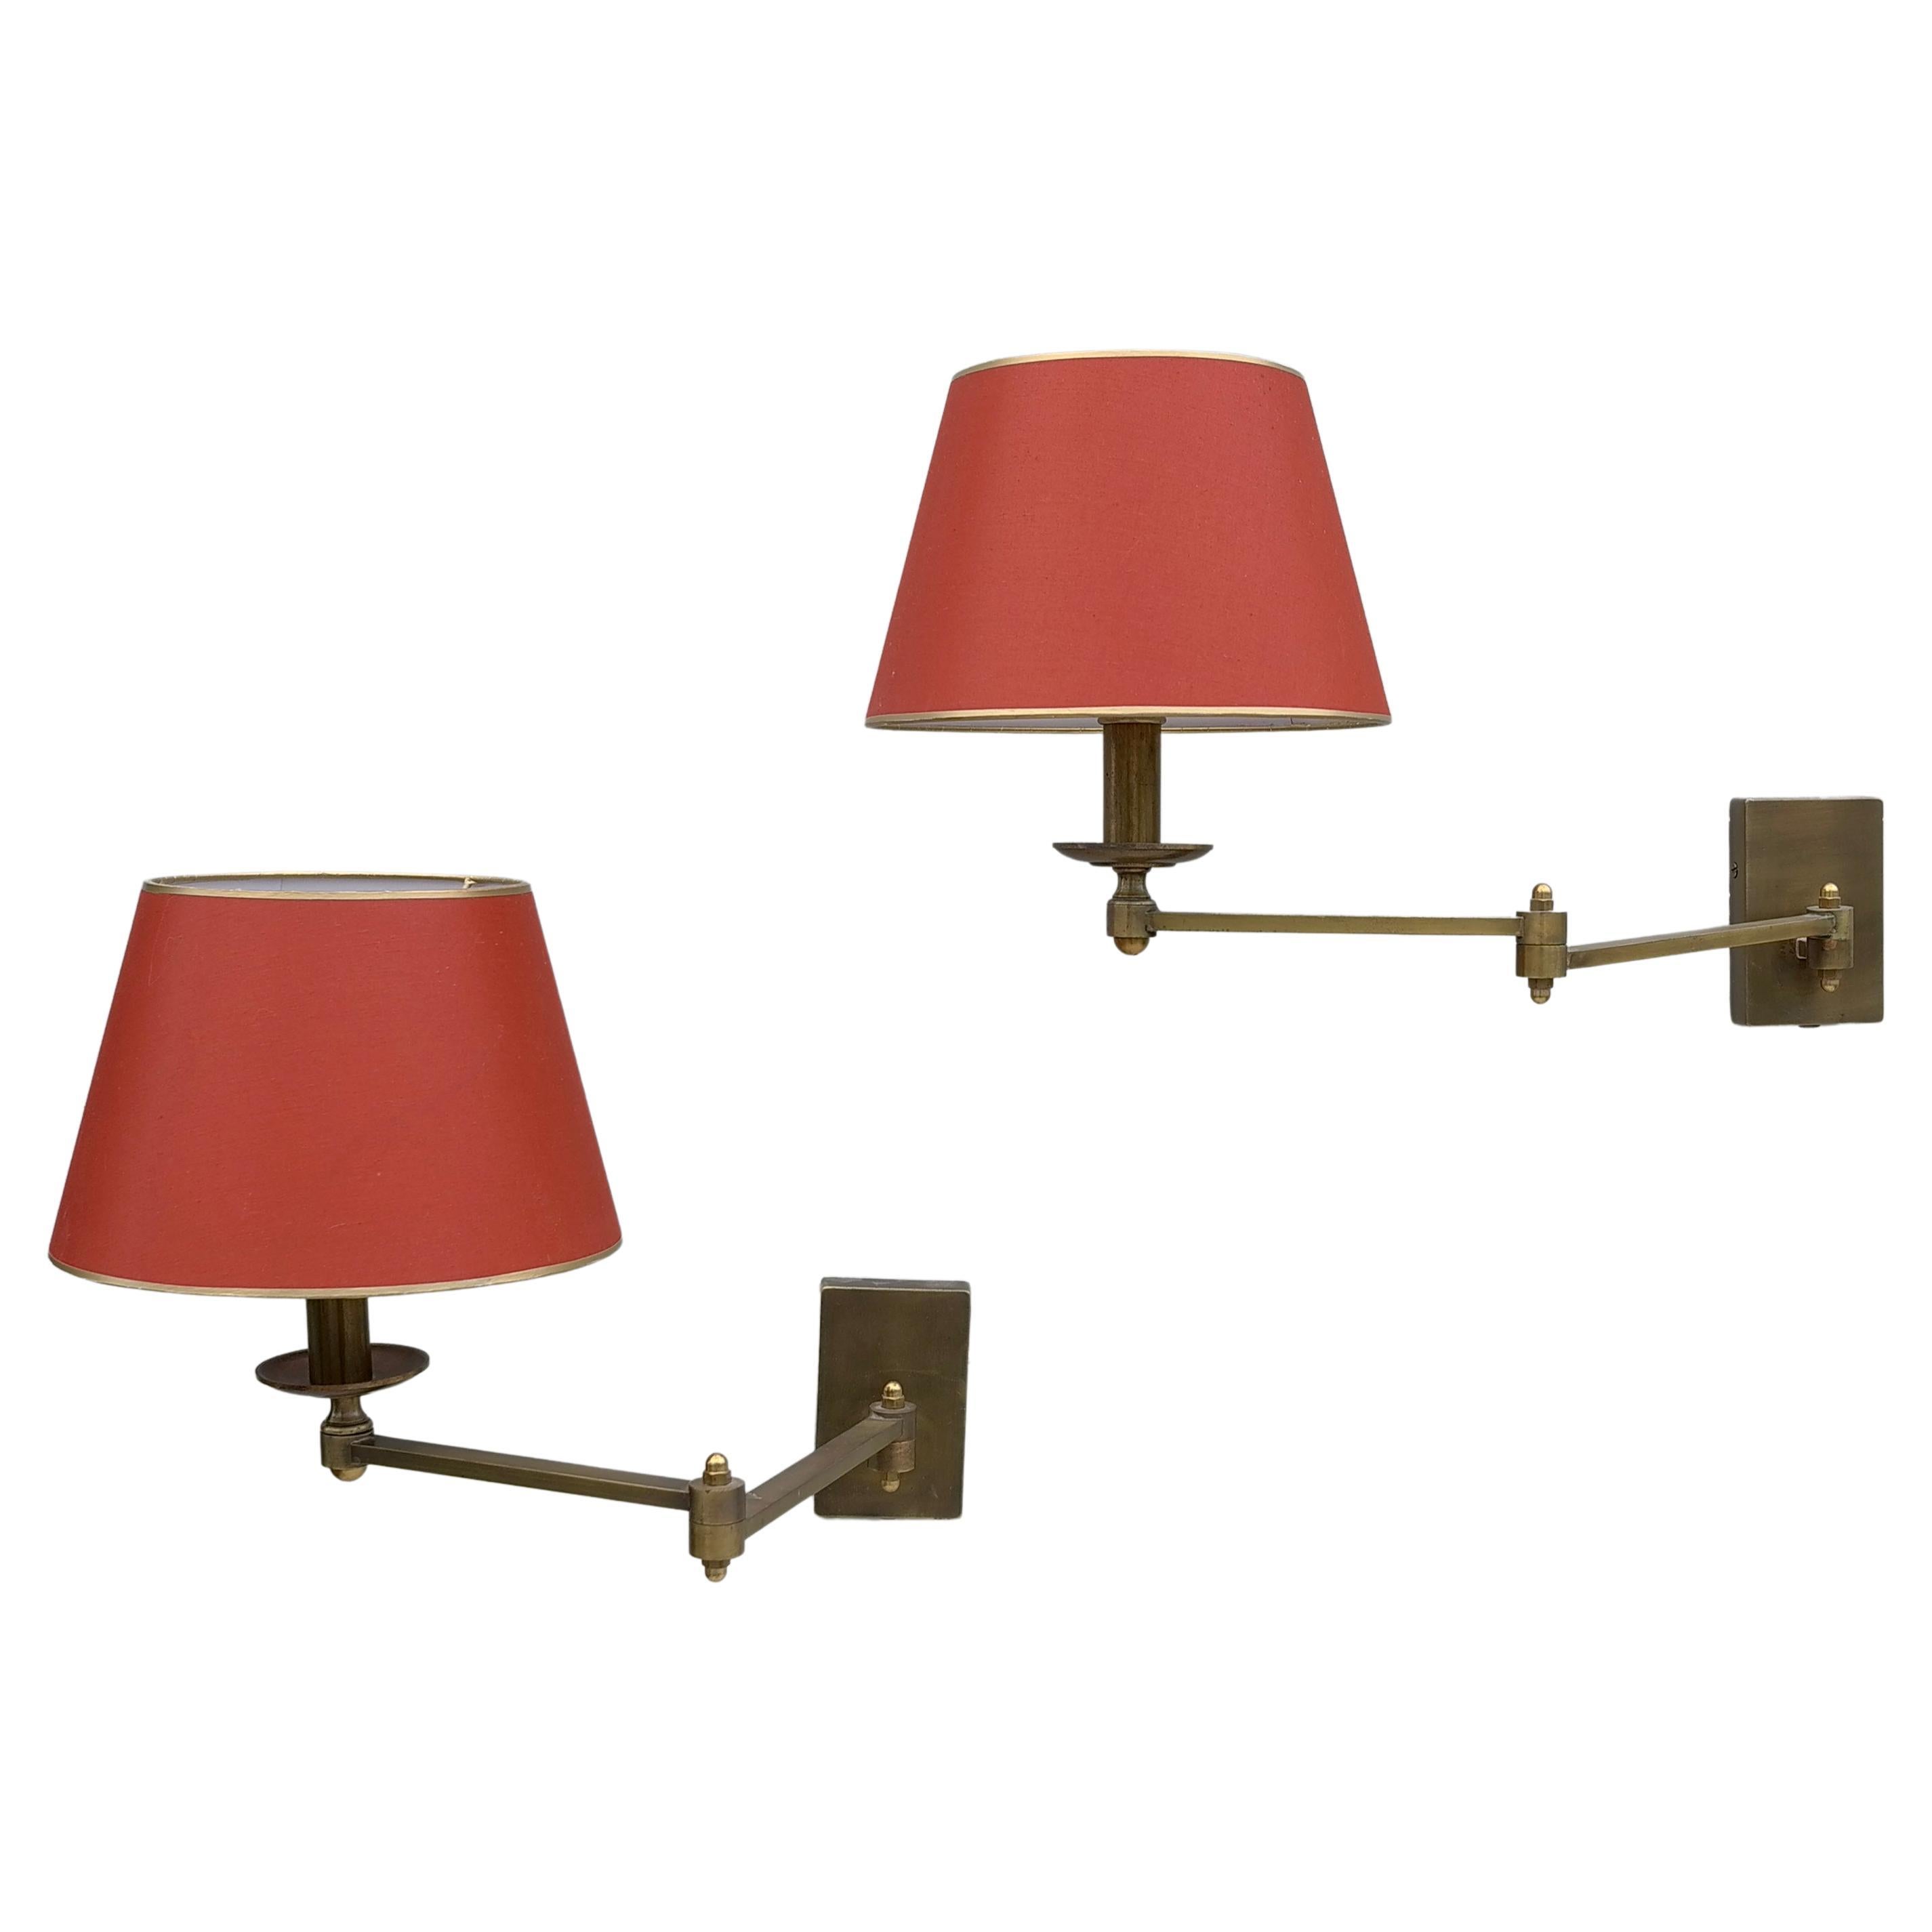 Pair of Swing arm Mid-Century Modern Brass wall lamps 